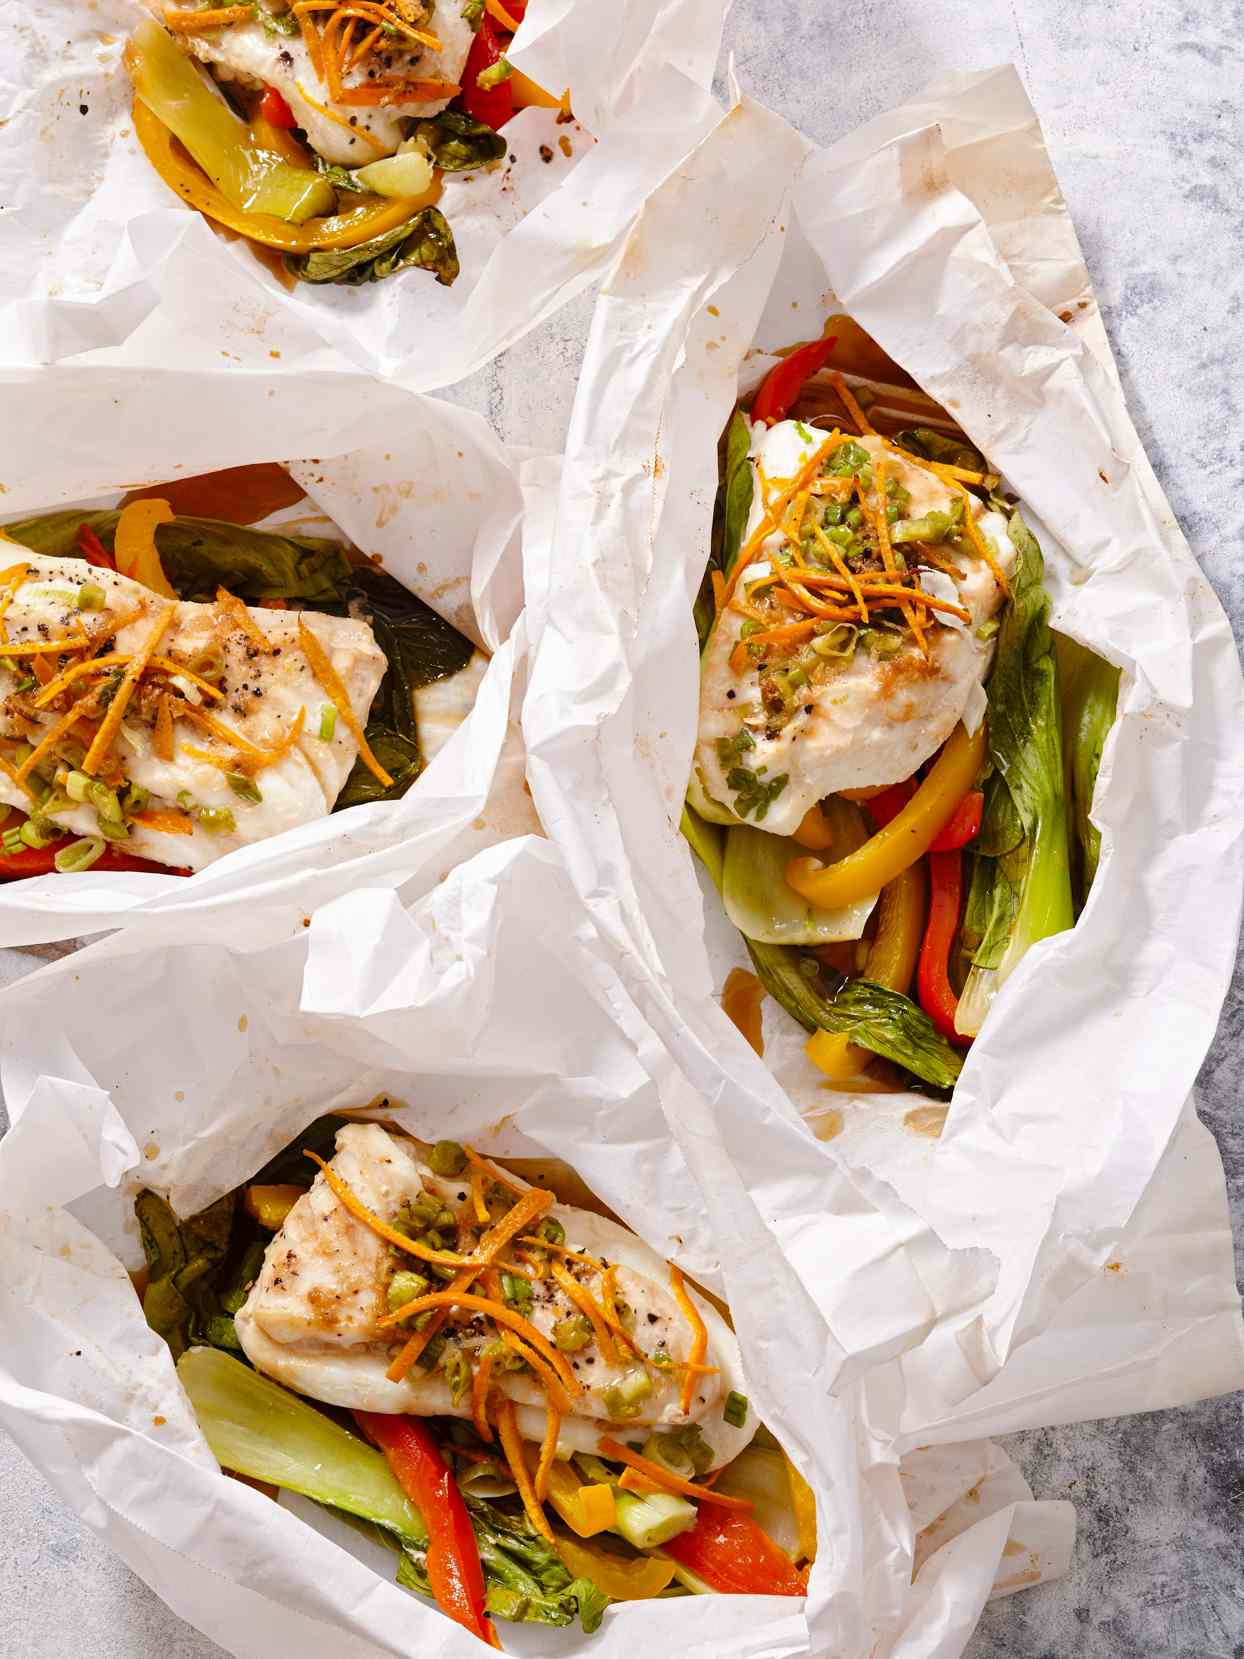 Gluten Free Parchment-Baked Halibut with Asian Vegetables